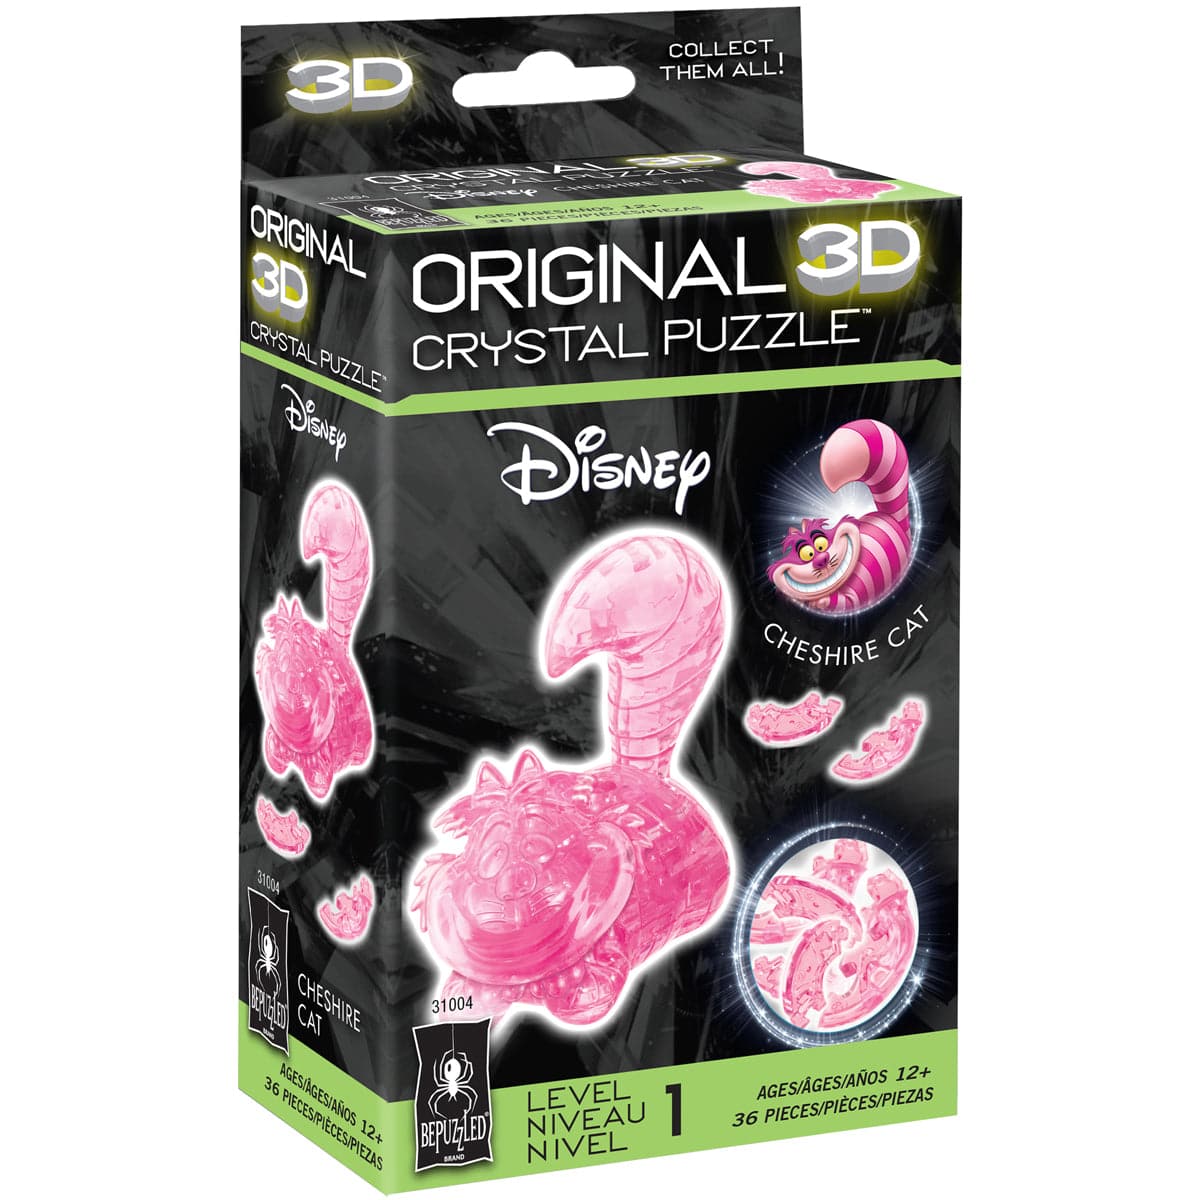 University Games-3D Disney Crystal Puzzle - Cheshire Cat-31004-Legacy Toys